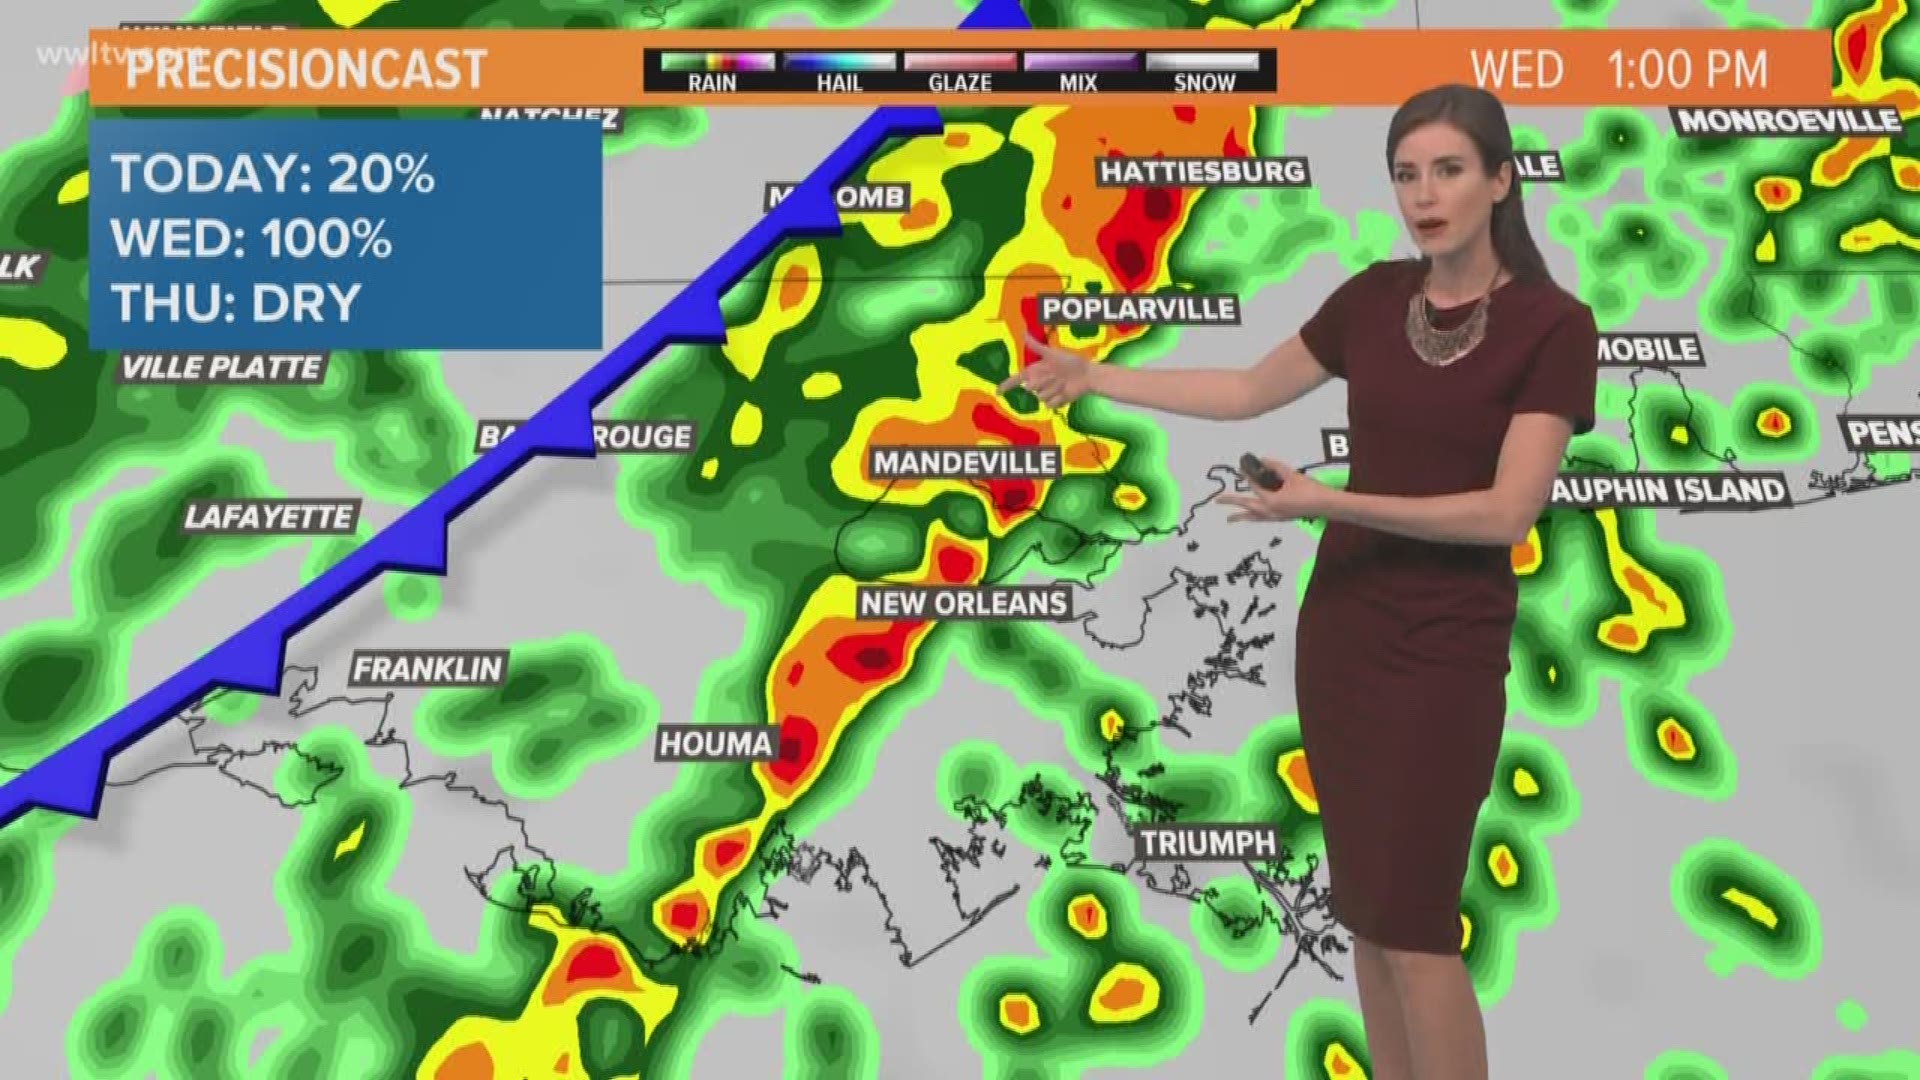 Meteorologist Alexandra Cranford has the forecast at noon on Tuesday, January 22, 2019.